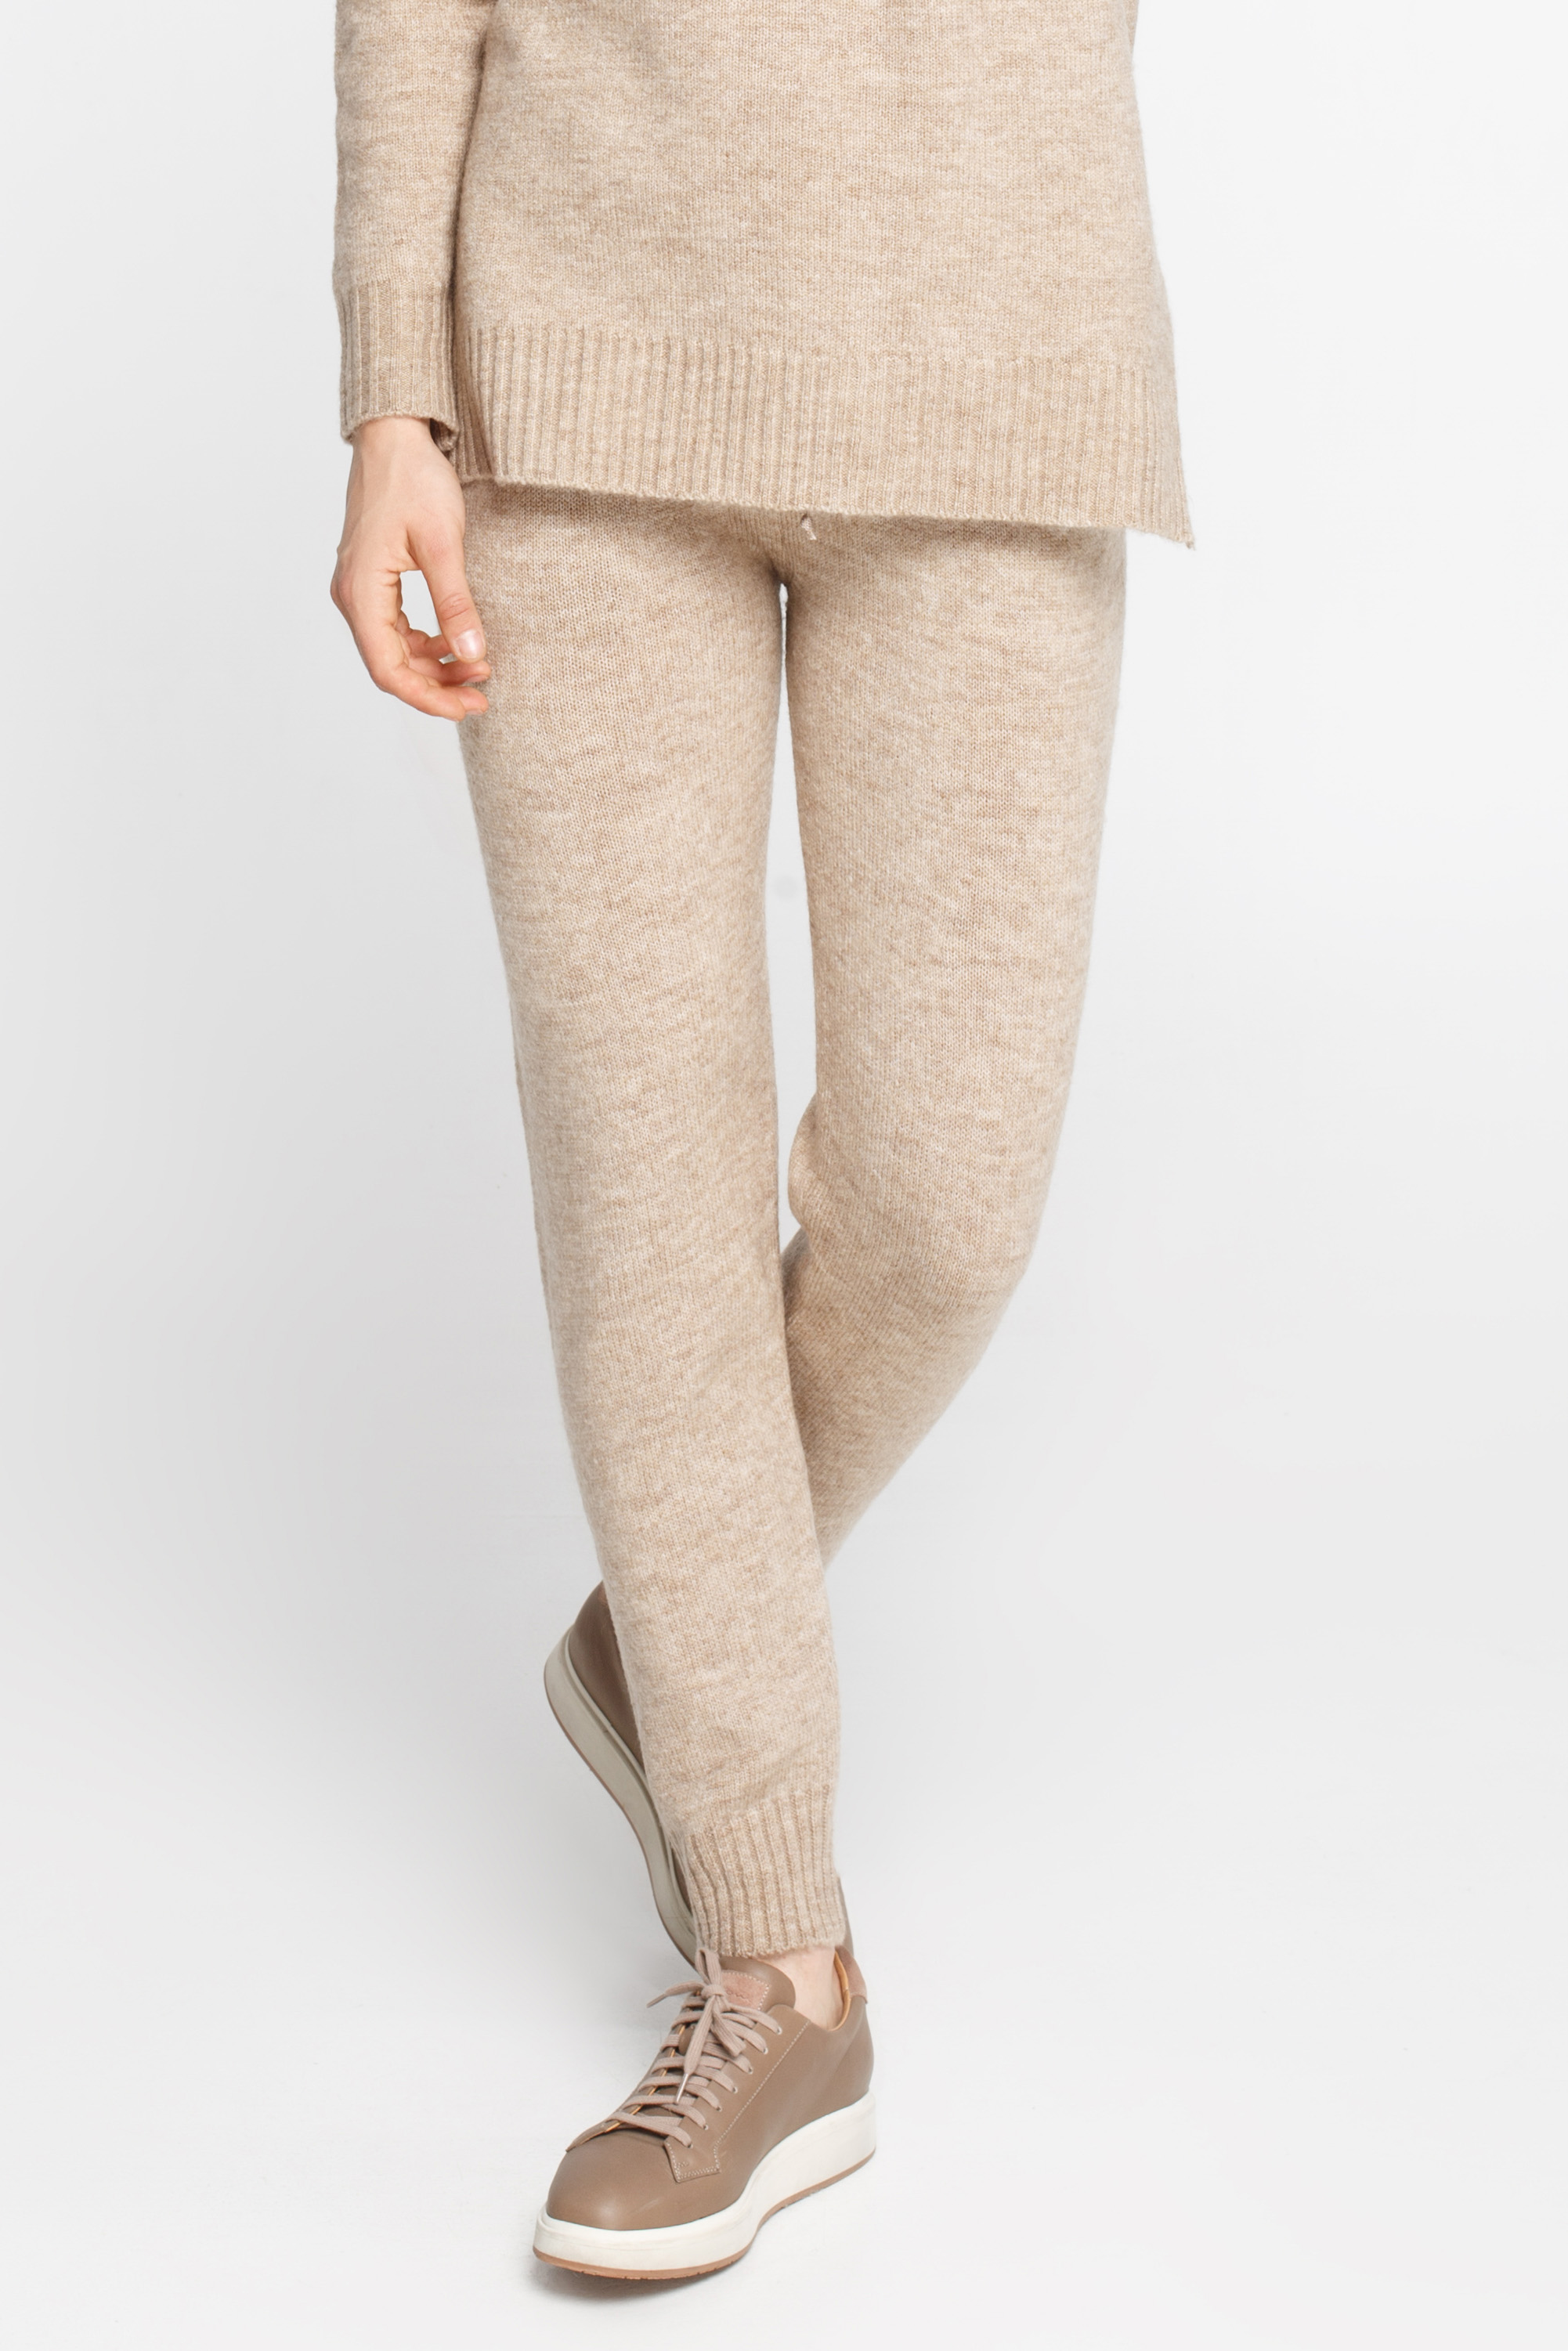 Knit beige jogging pants with wool, photo 1